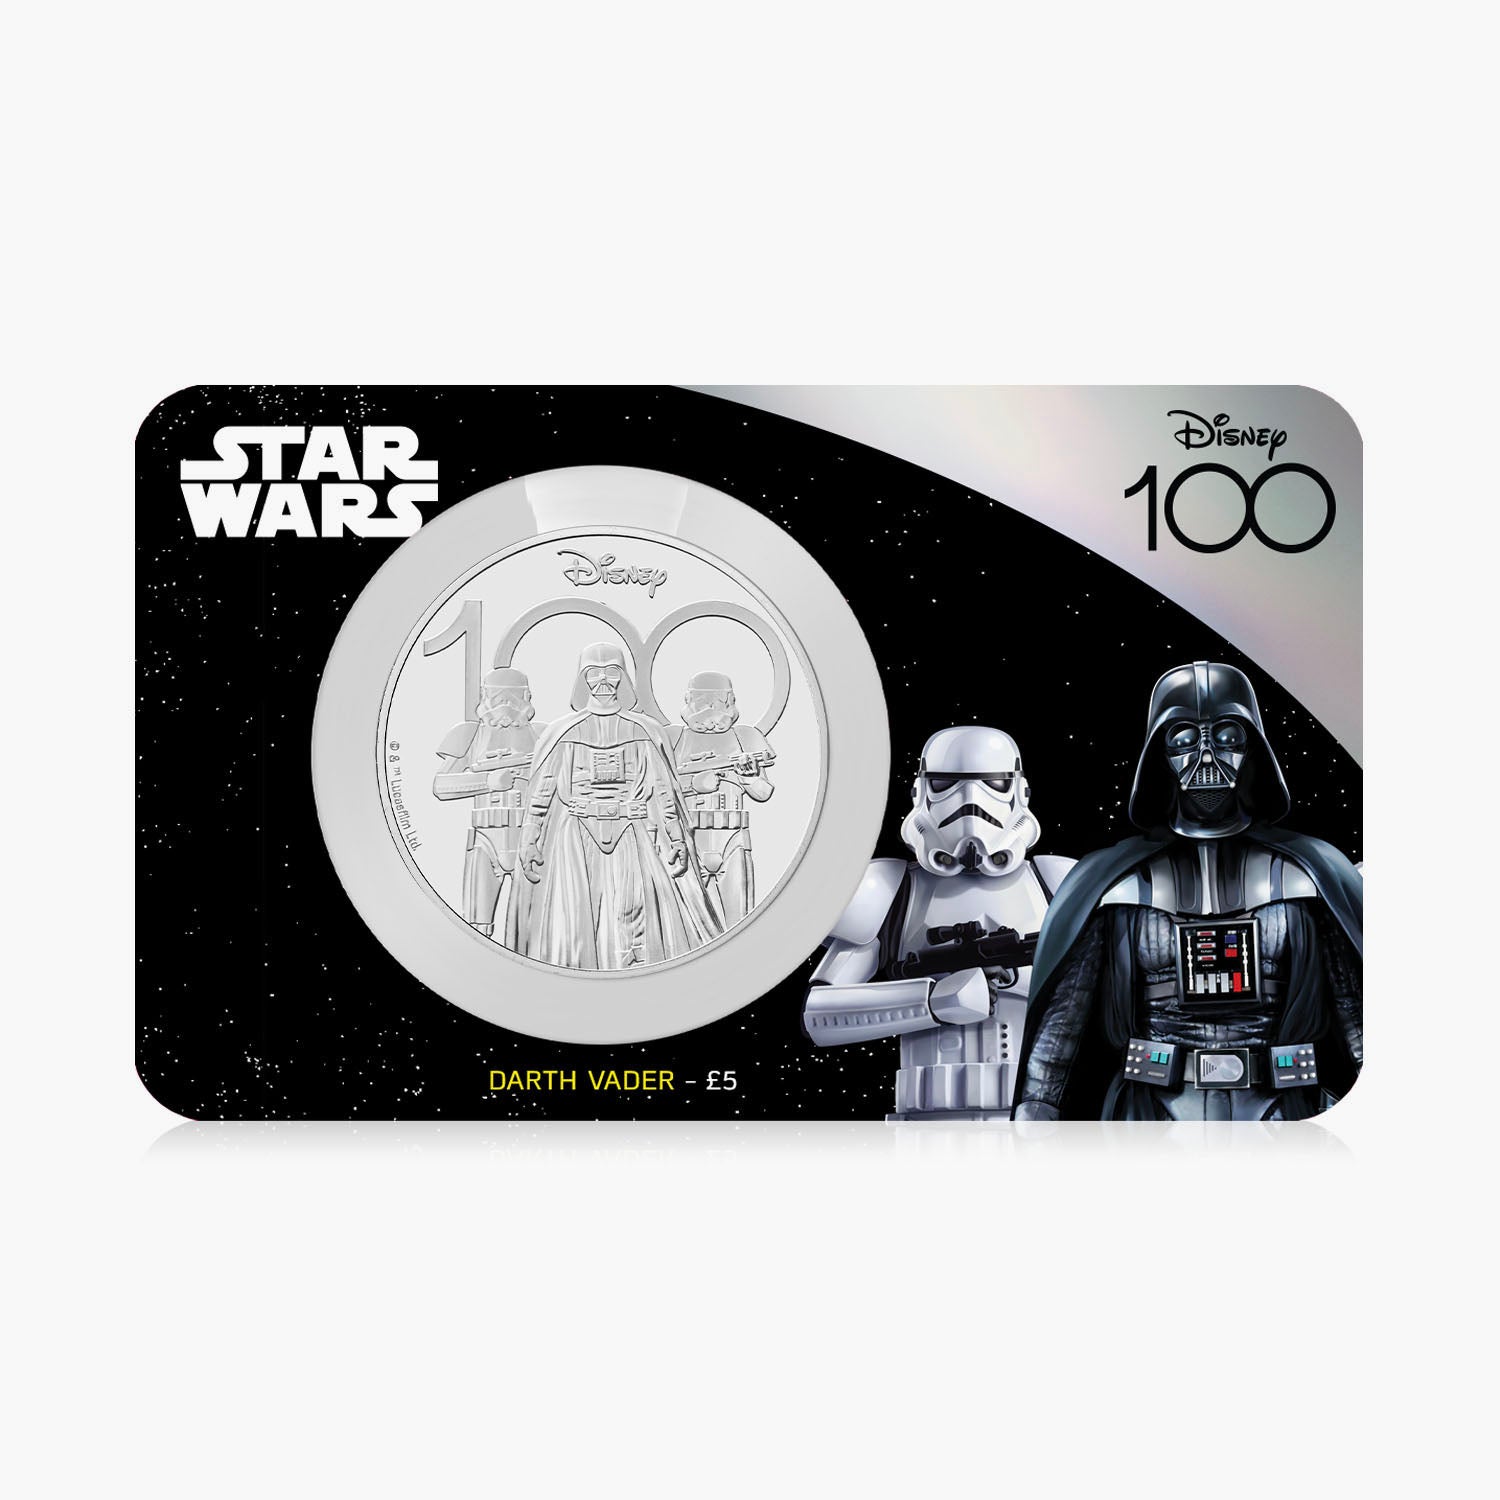 Star Wars Darth Vader and Storm Troopers 2023 £5 BU Coin